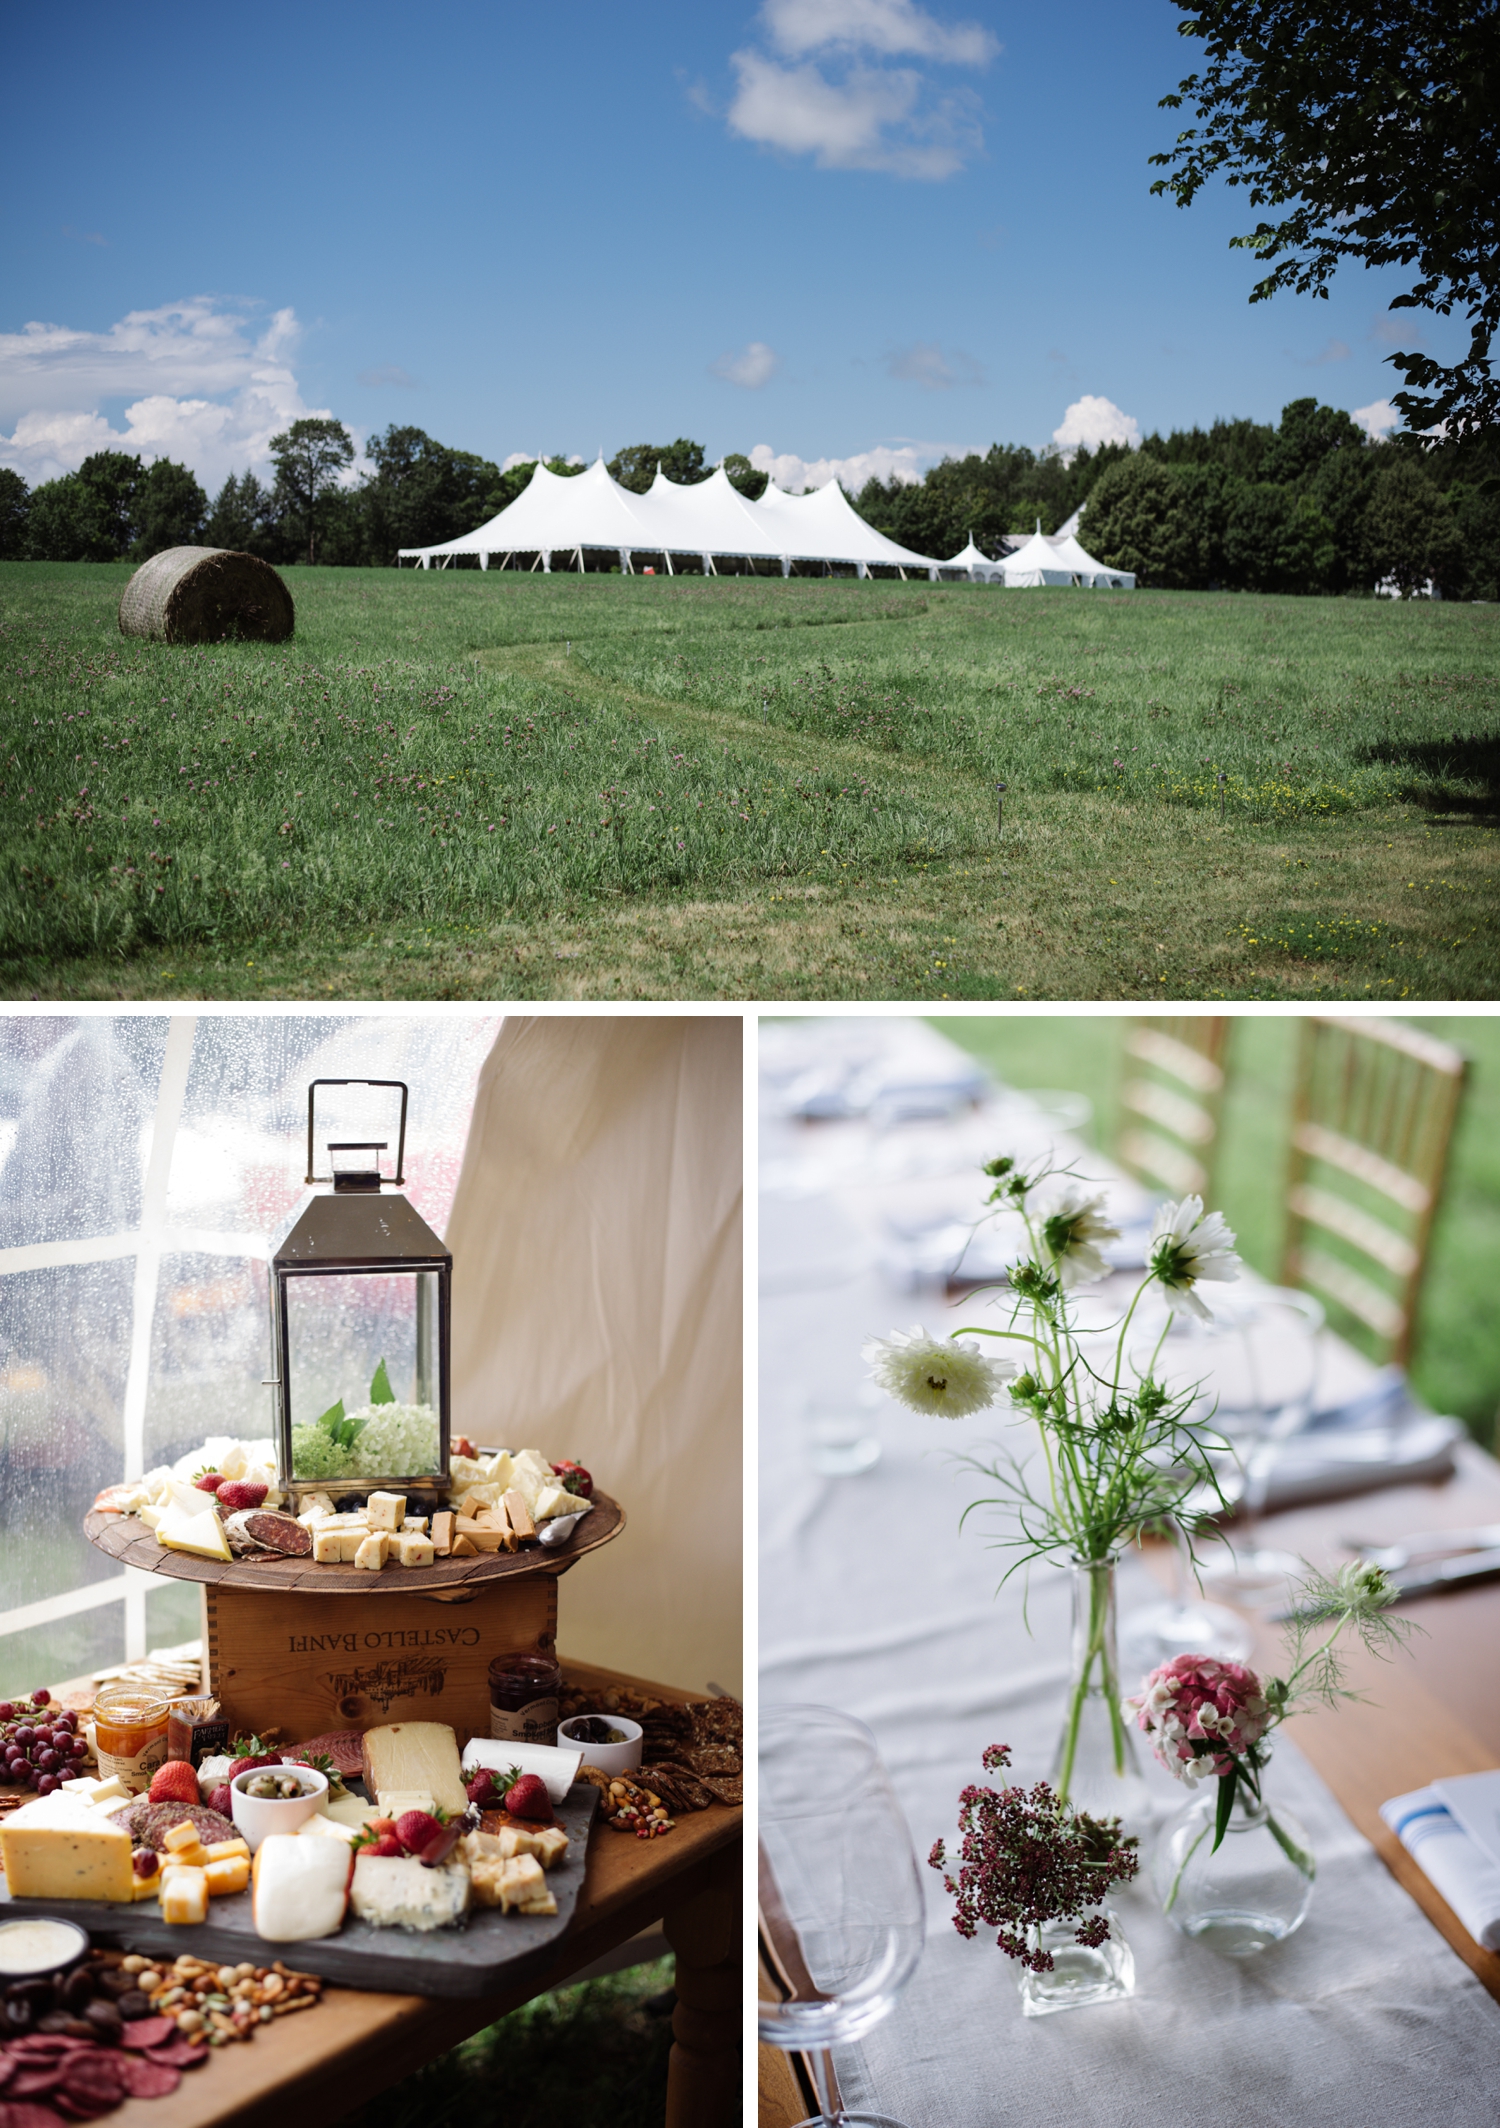 Tented wedding in a private backyard in New Haven, Vermont